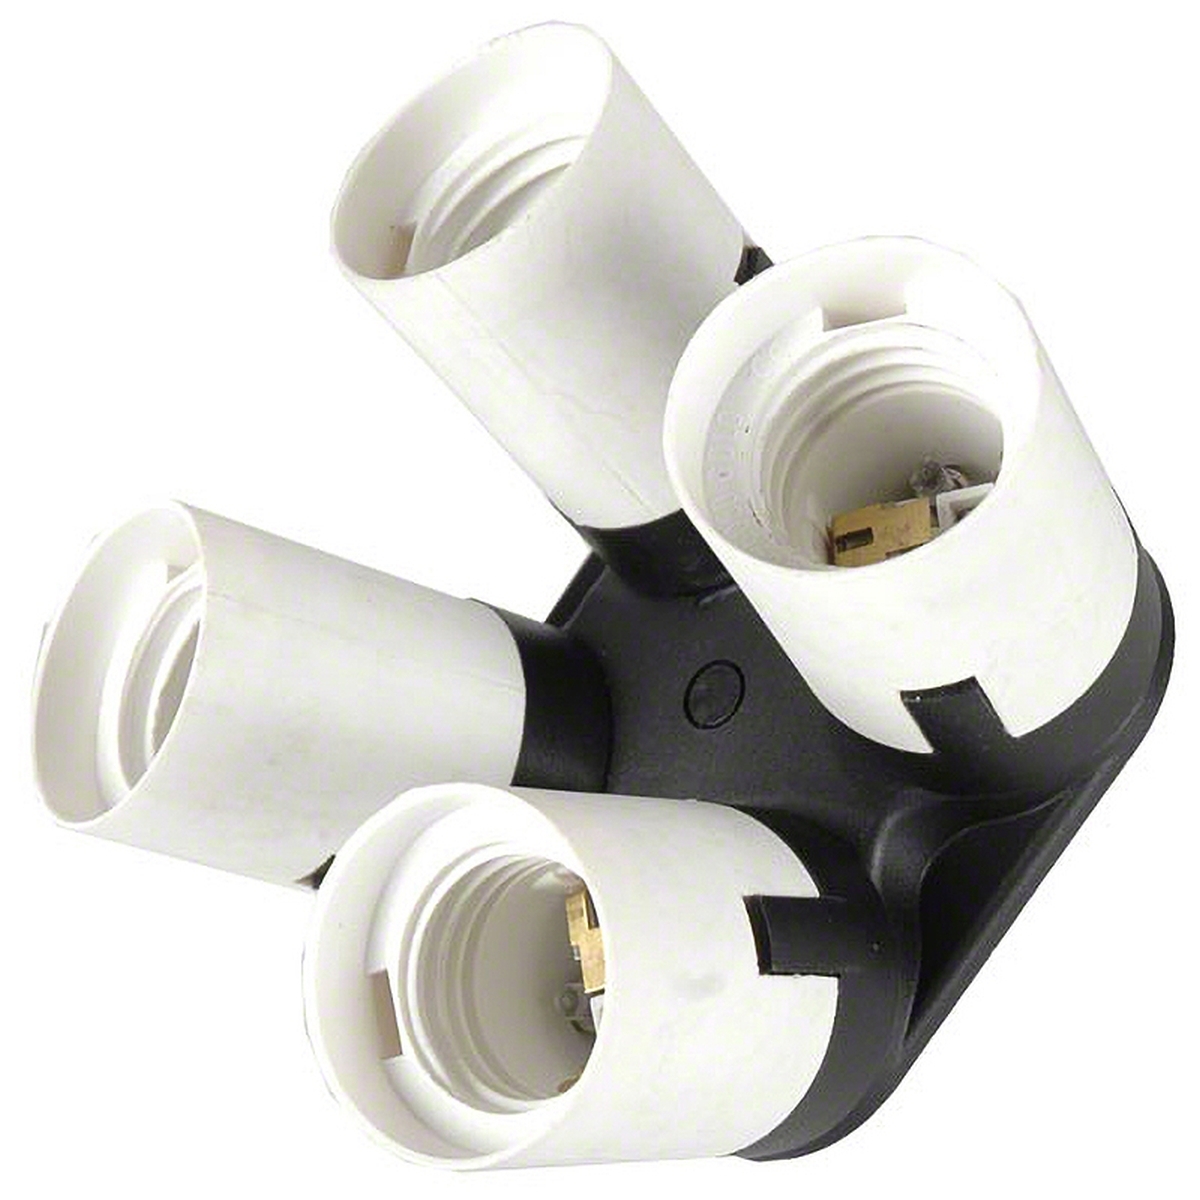 Walimex 4 in 1 Lamp Holder